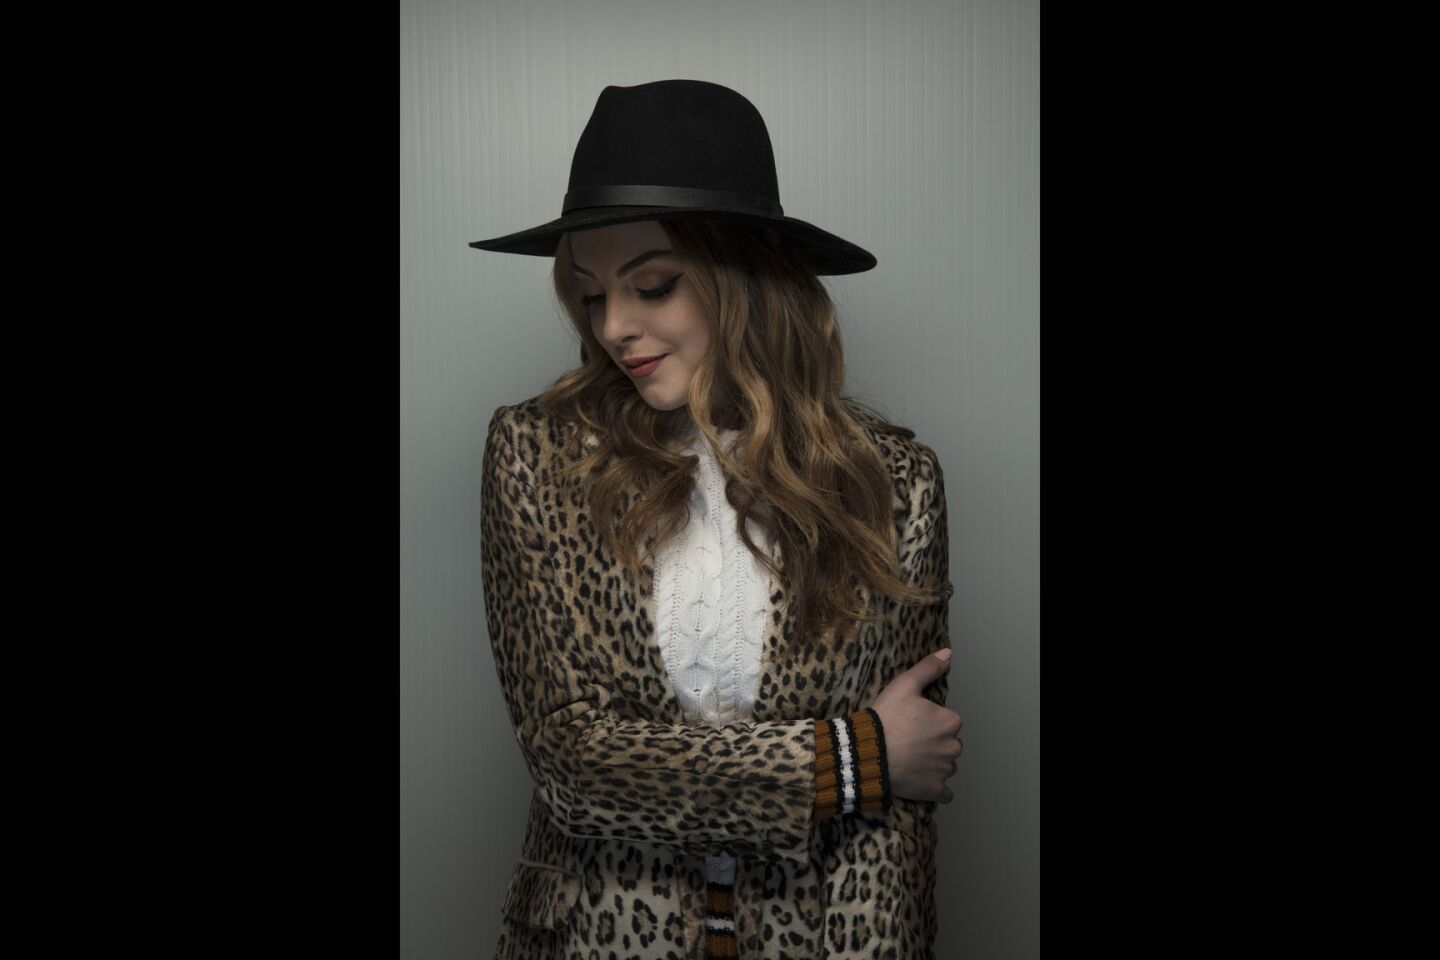 Actress Elizabeth Gilles, from the film, "Arizona," photographed in the L.A. Times studio during the Sundance Film Festival in Park City, Utah, Jan. 20, 2018.